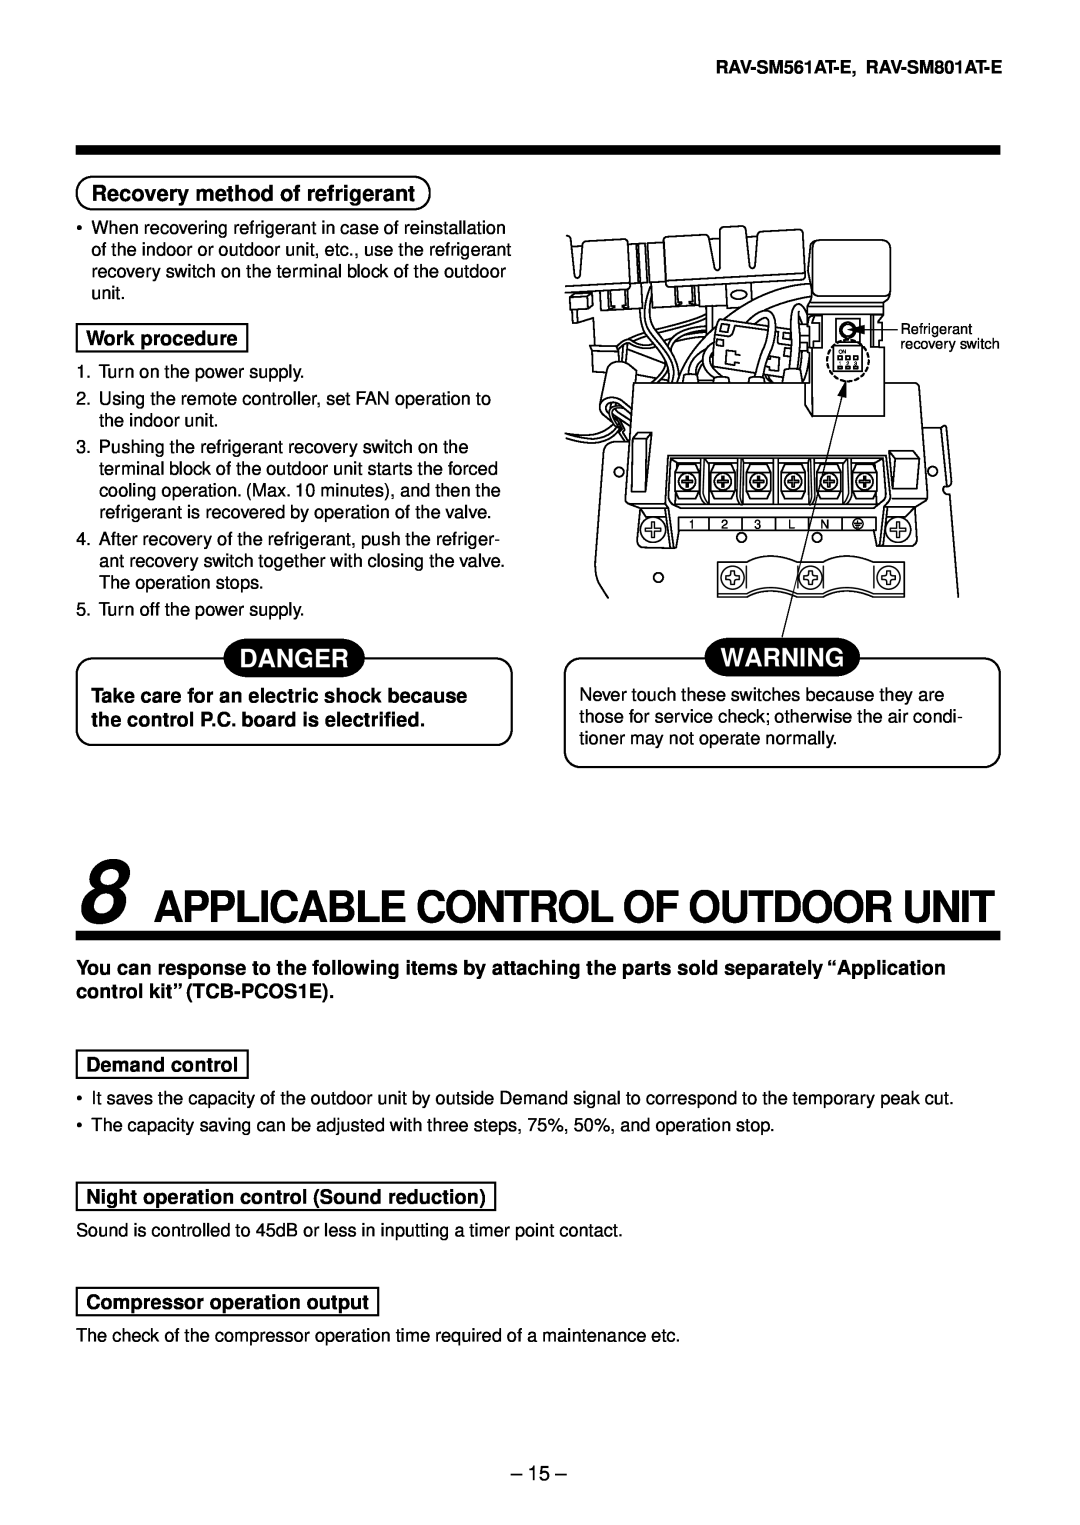 Toshiba RAV-SM561AT-E Applicable Control Of Outdoor Unit, Danger, Recovery method of refrigerant, Work procedure 